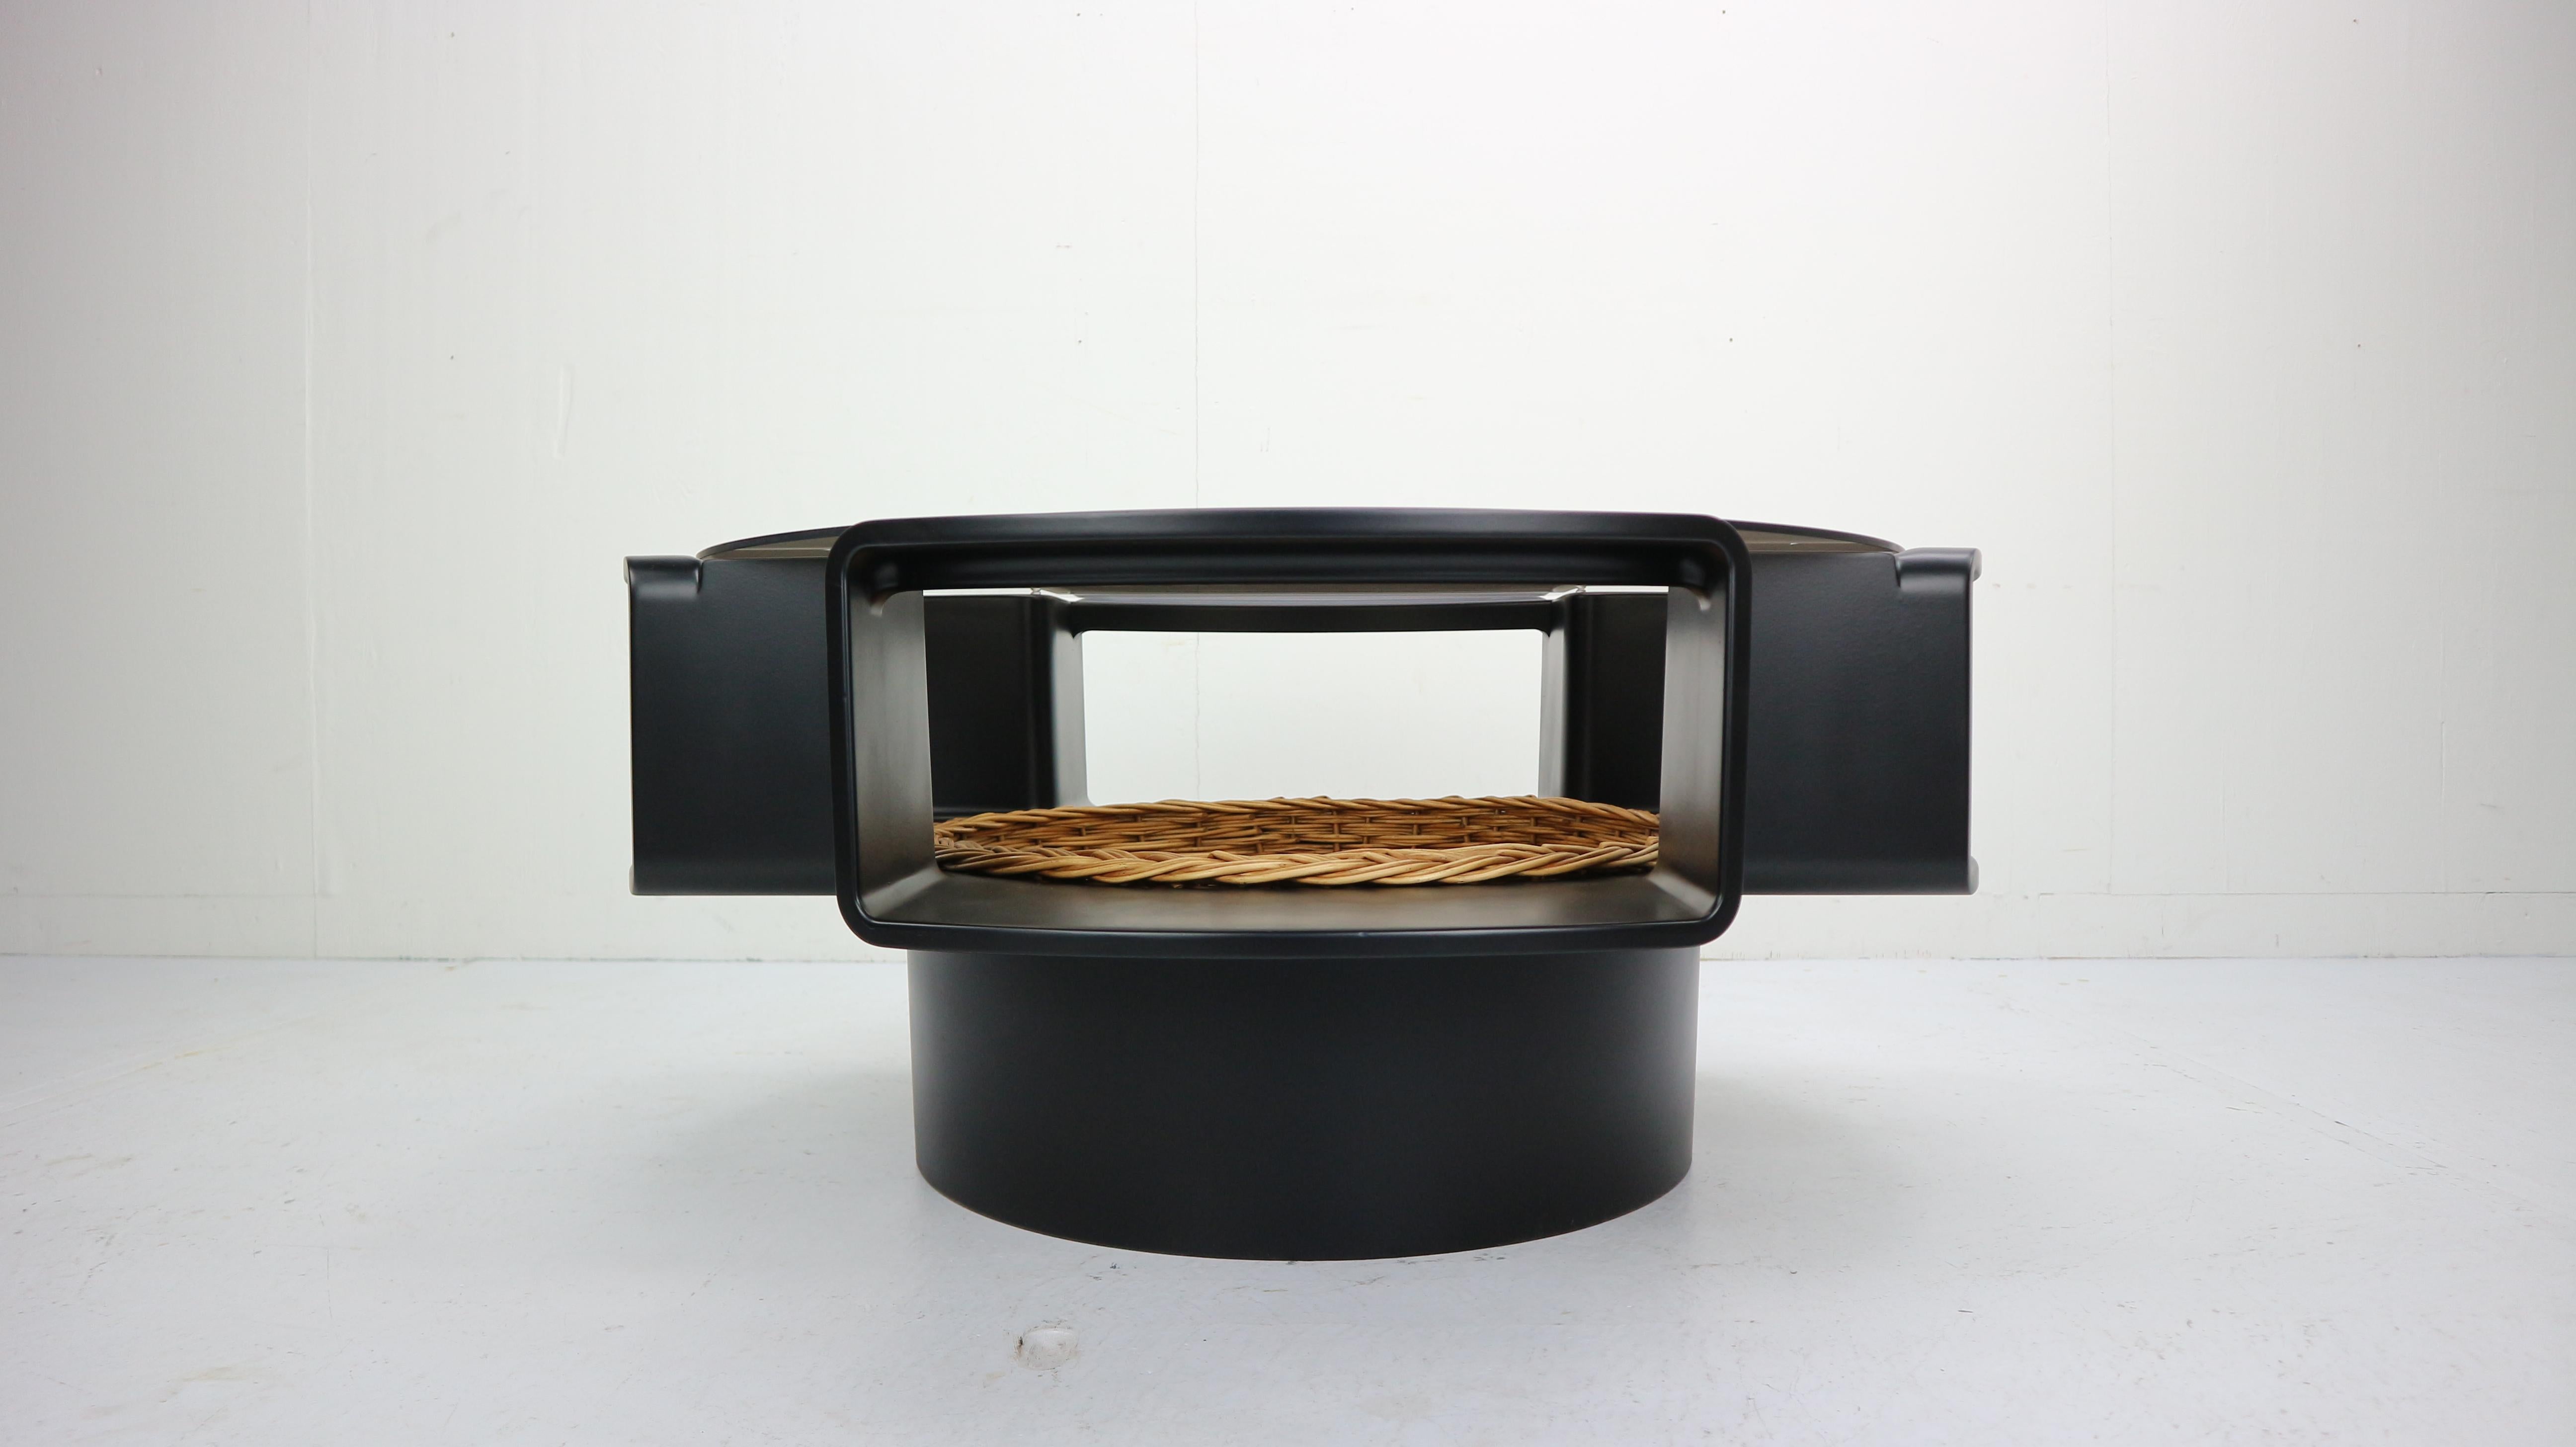 The table was designed by Curver-form and produced in Germany in the 1970s. 
This Ufo table is an extraordinary, Space Age period design peace. 

The table is made from black fiberglass and smoked glass top
In the middle of the base there is a